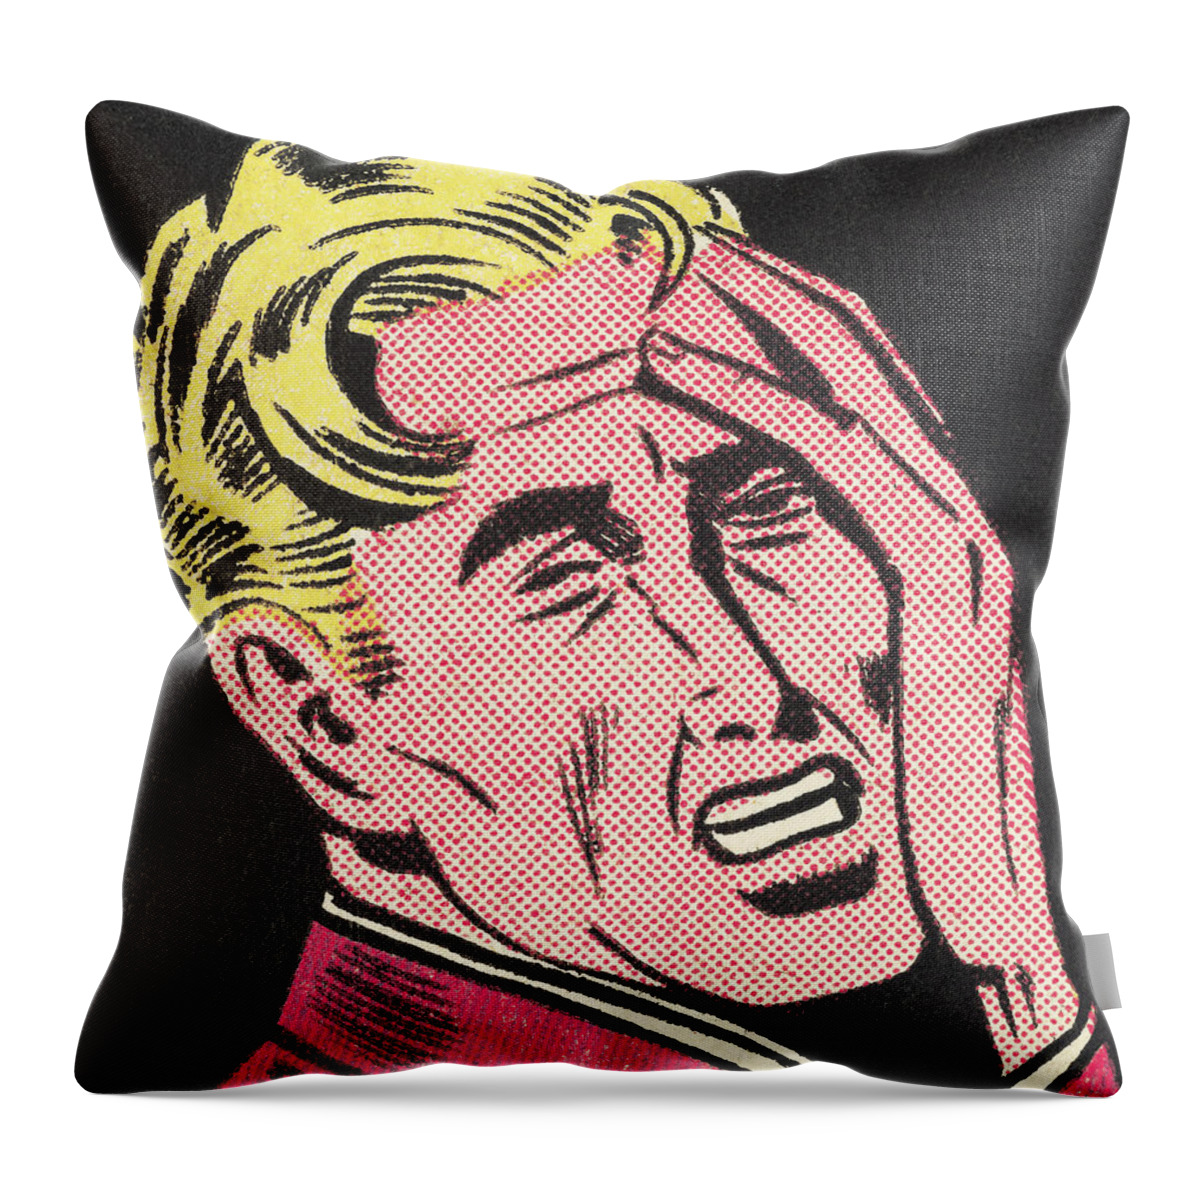 Adult Throw Pillow featuring the drawing Distressed Man by CSA Images